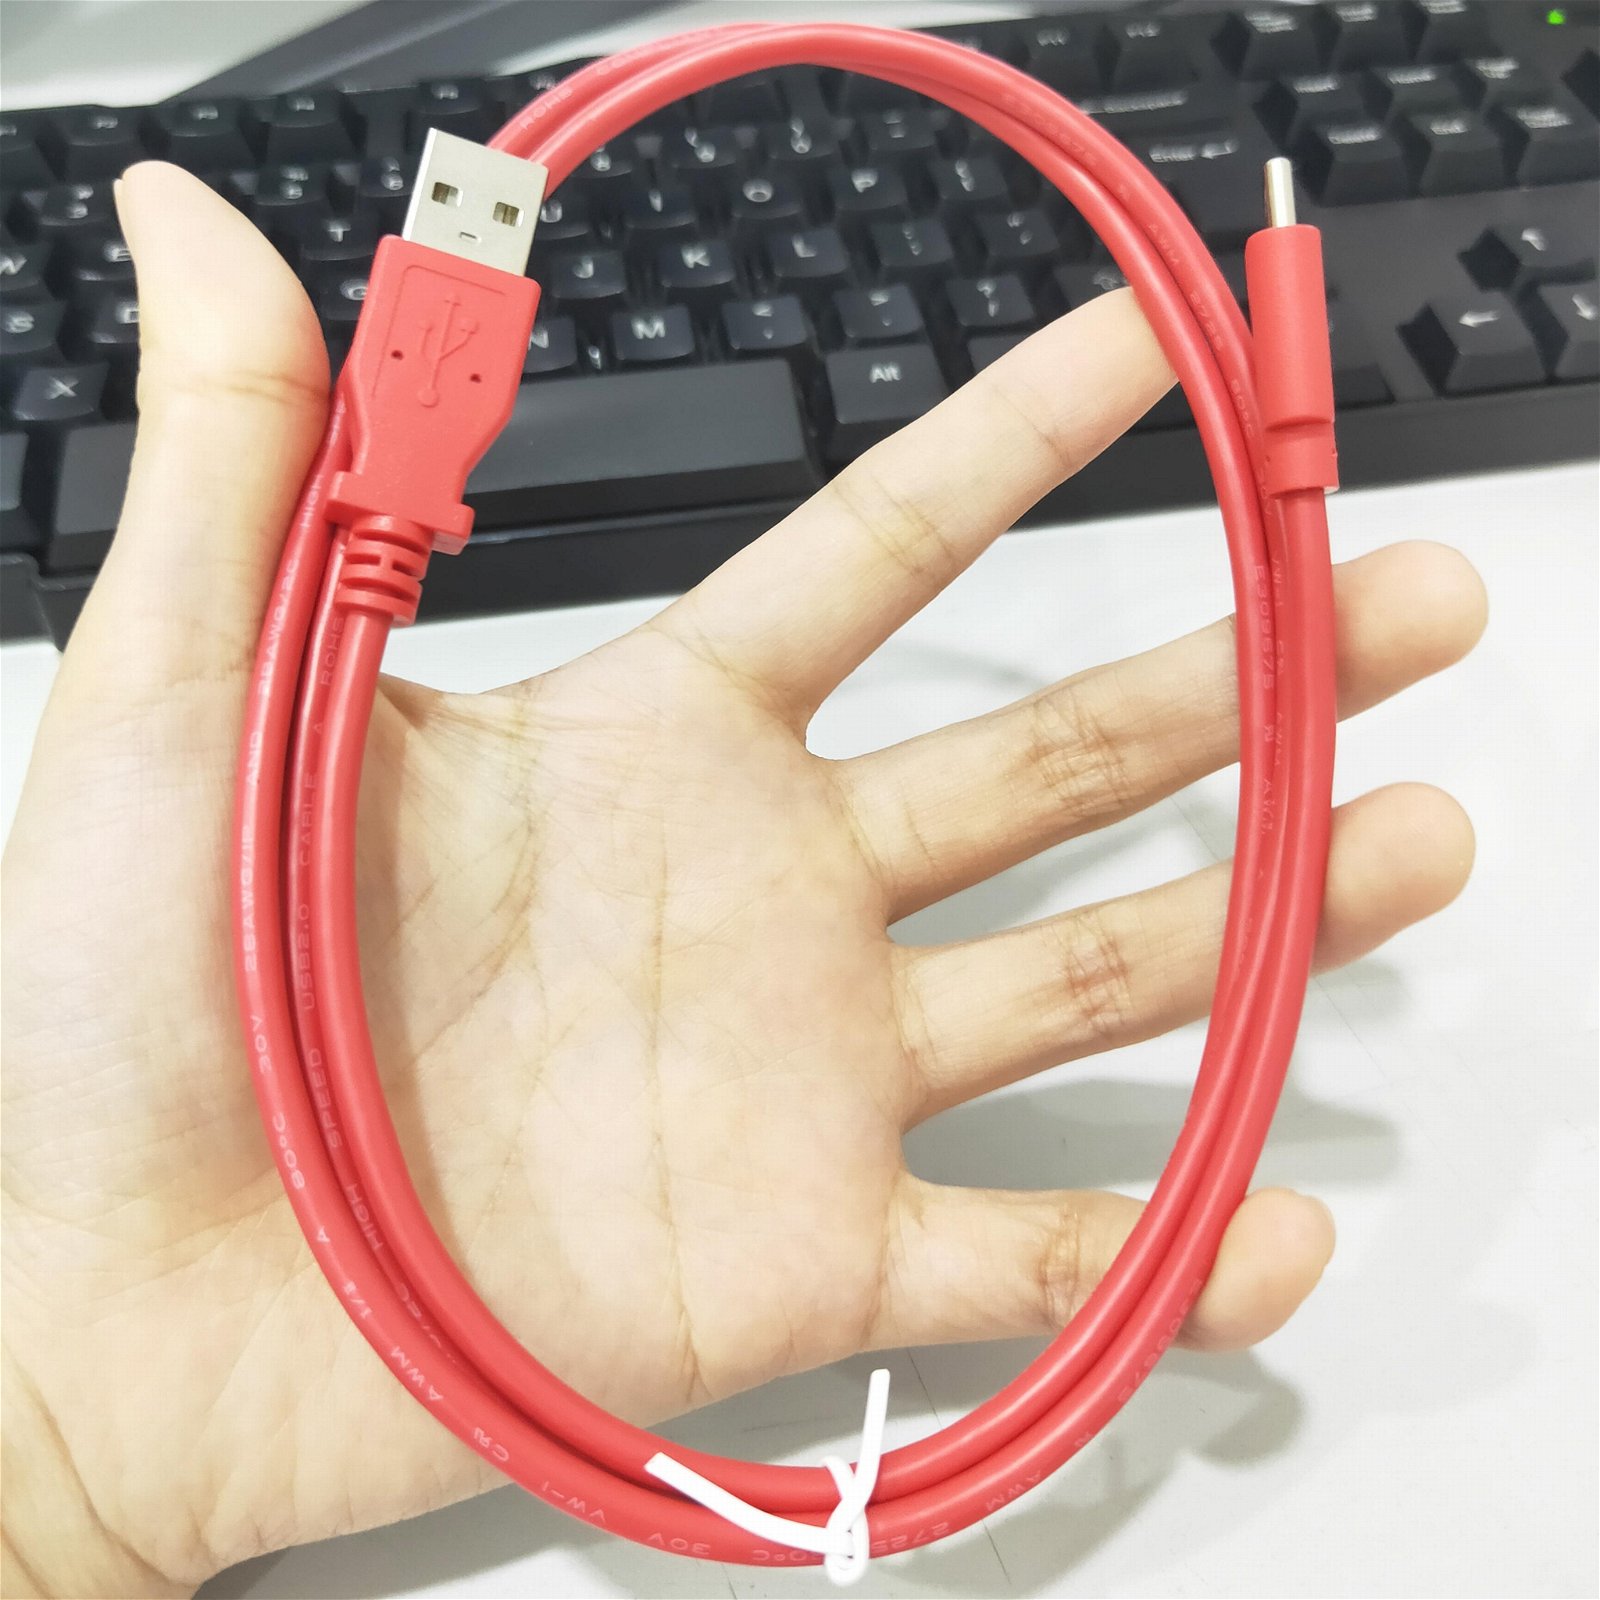 USB-C to USB A Cable Data Transfer Braid USB 3.1 to USB 2.0 A Cable 2